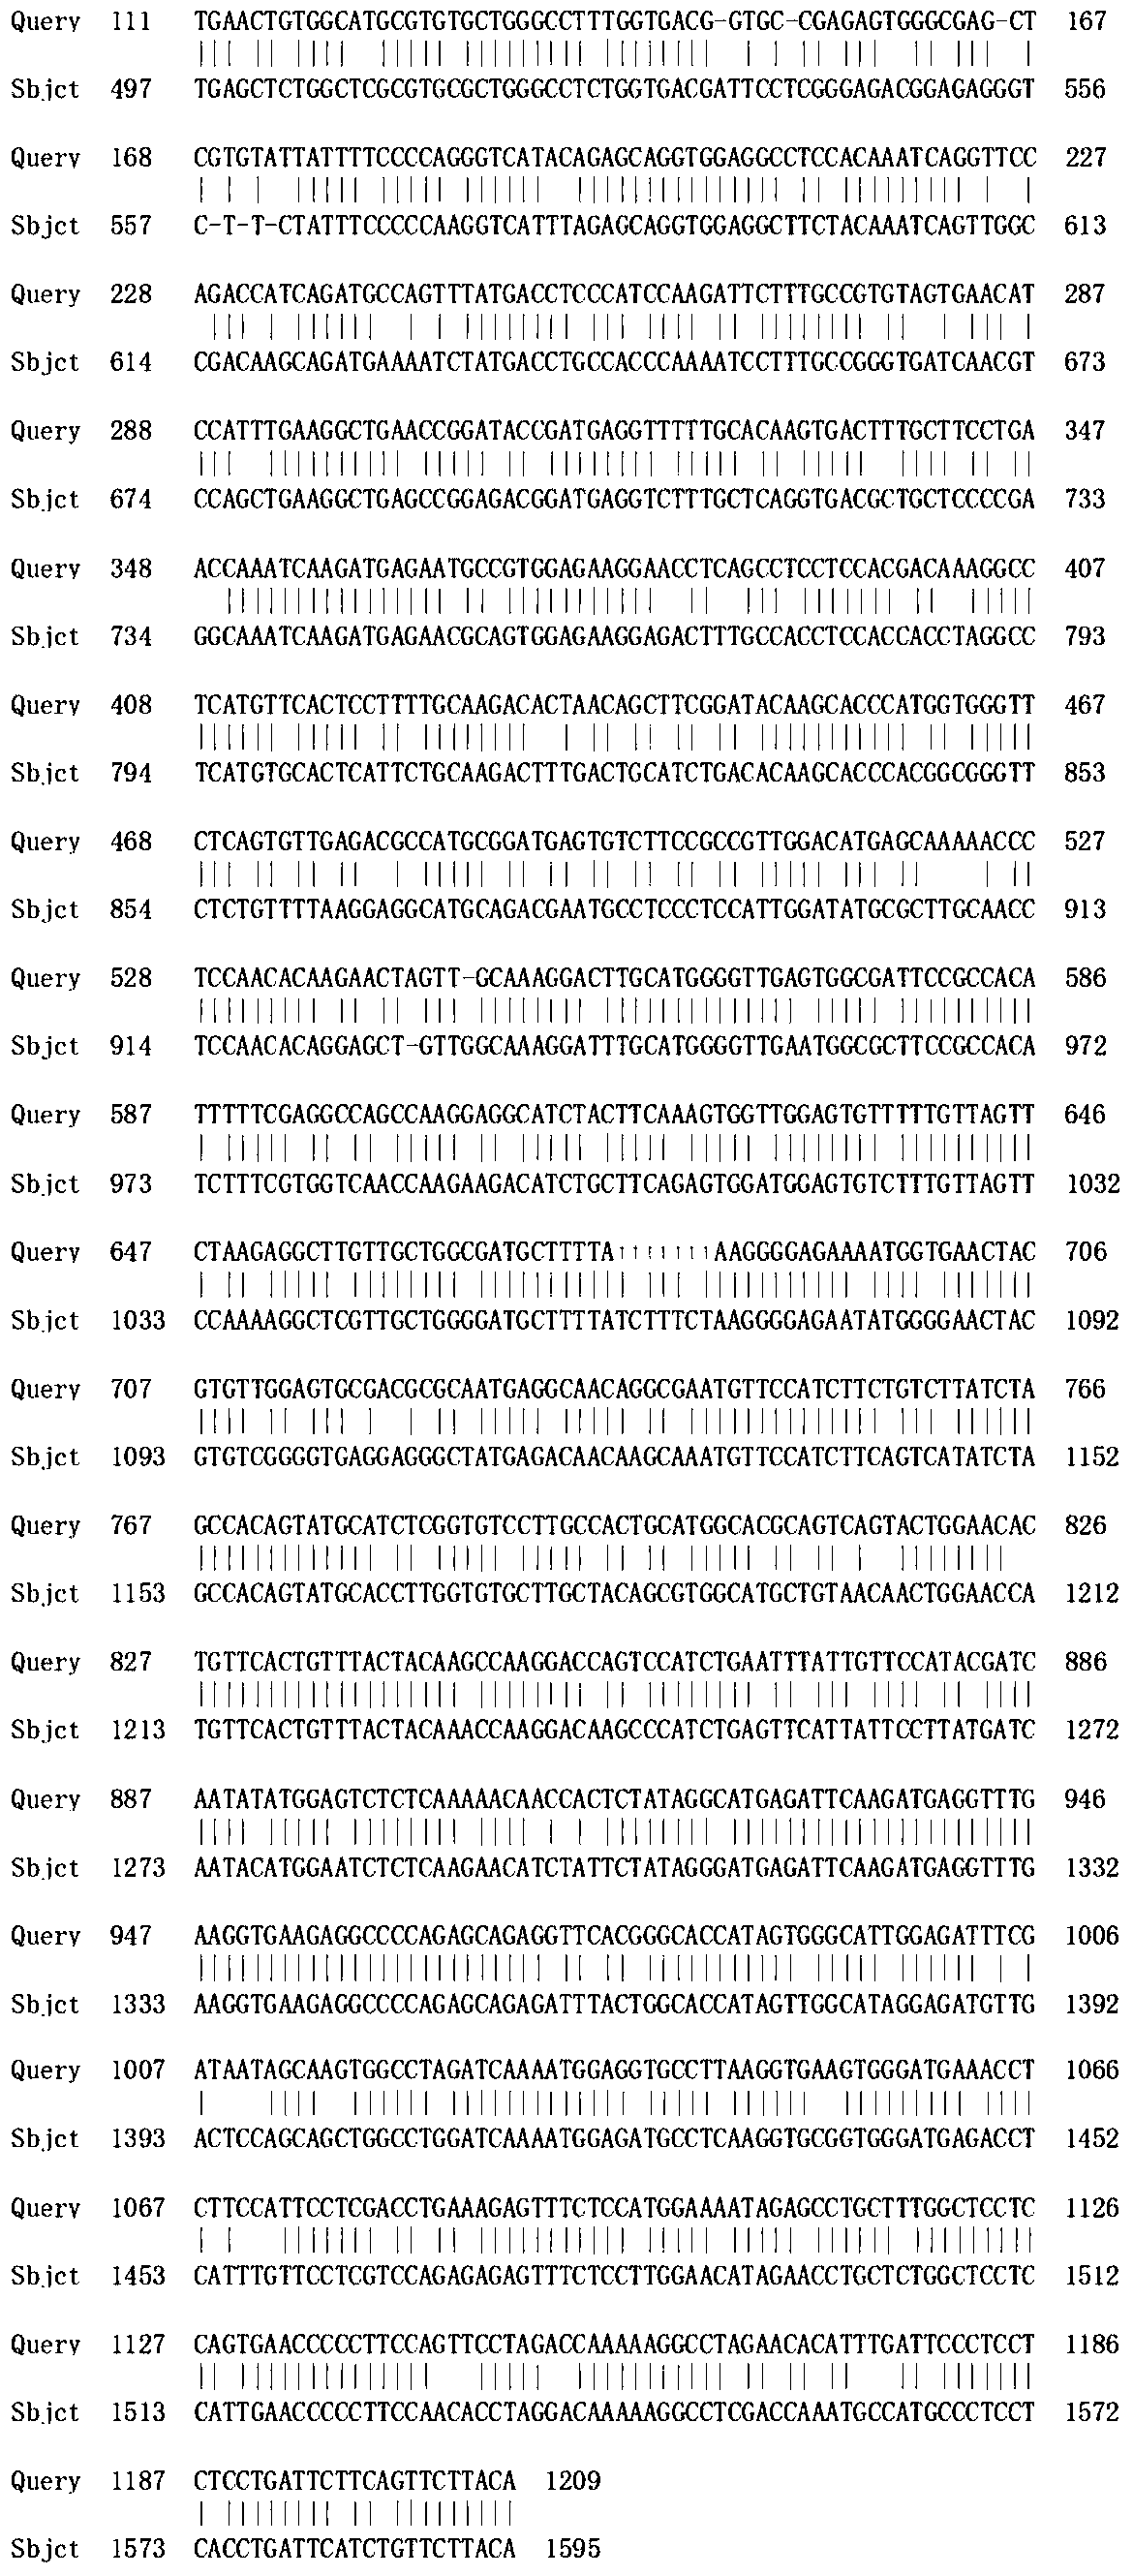 The auxin response factor aparf2 of Agapanthus chinensis and its coding gene and probe